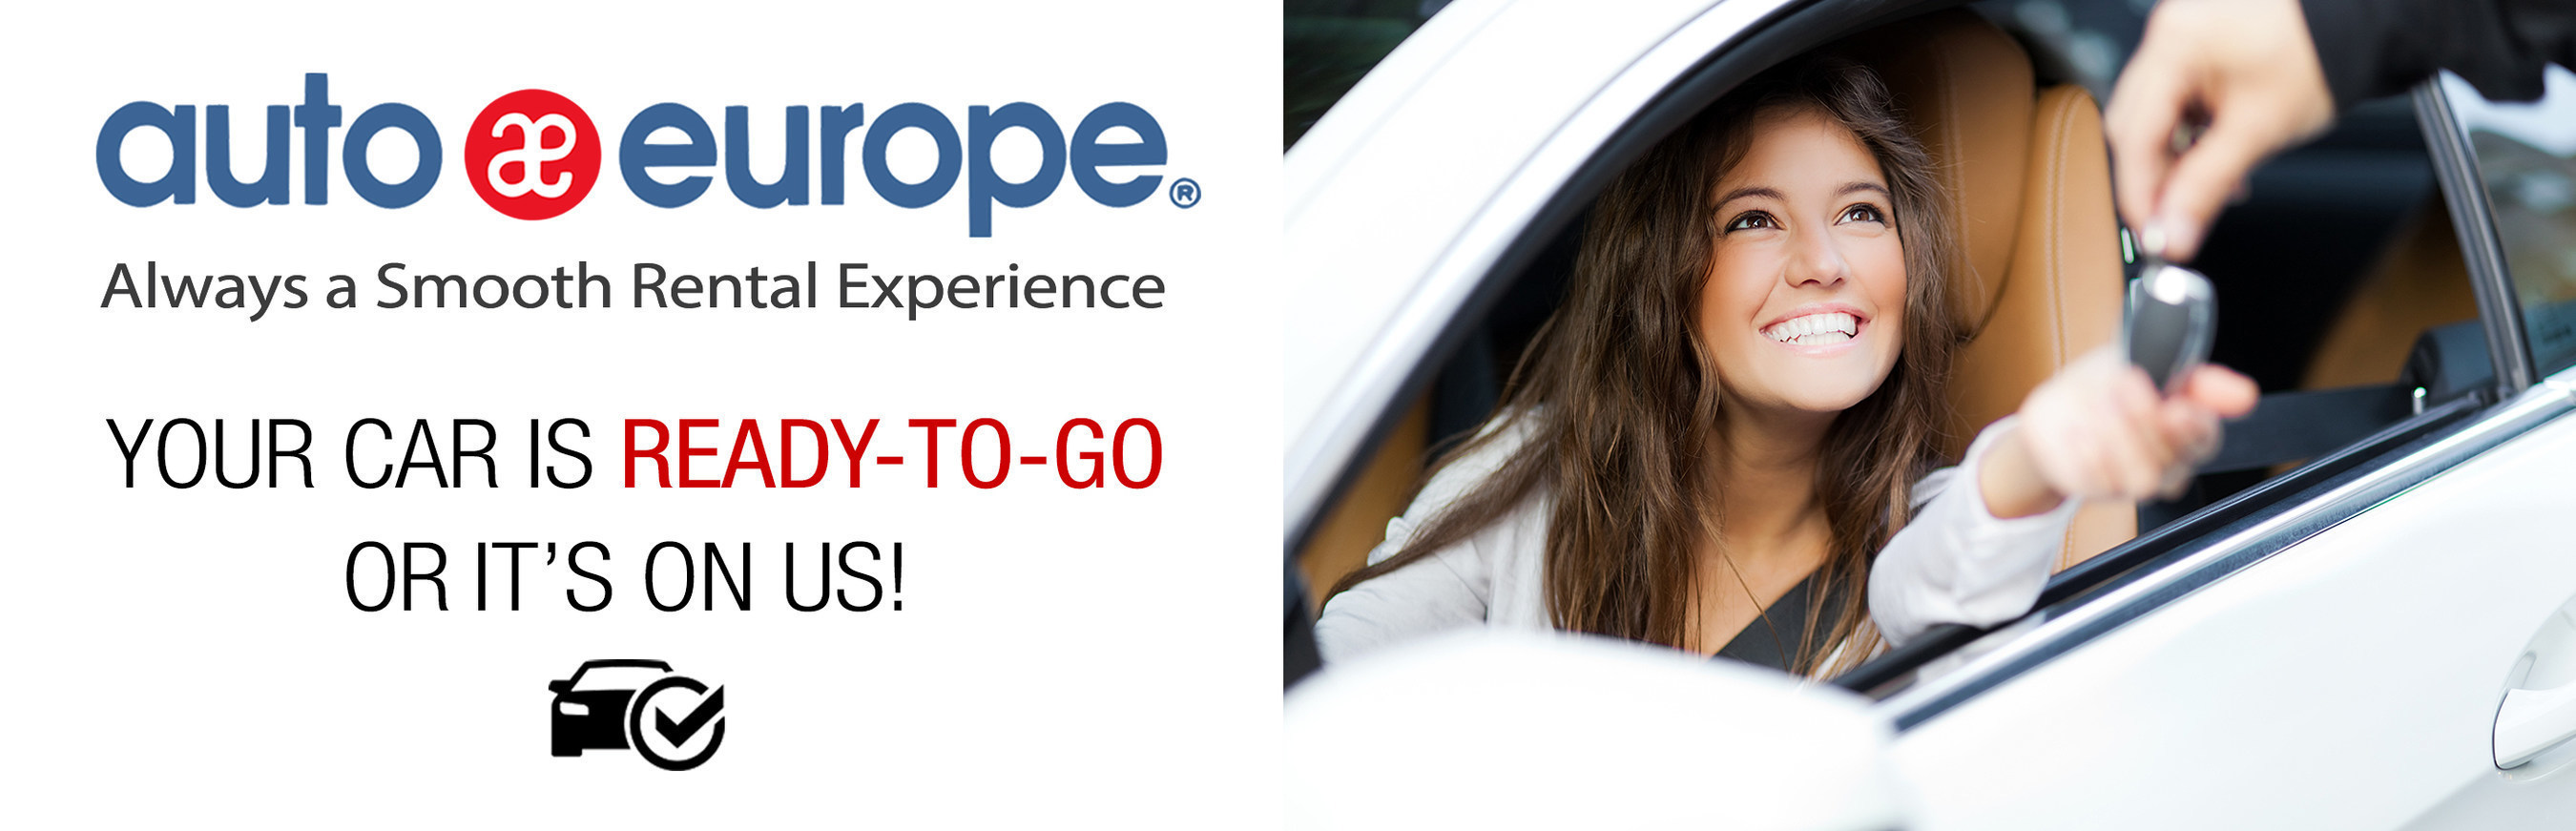 Auto Europe introduces a First-of-Its-Kind Guarantee: It's "Ready-to-Go" or it's Free